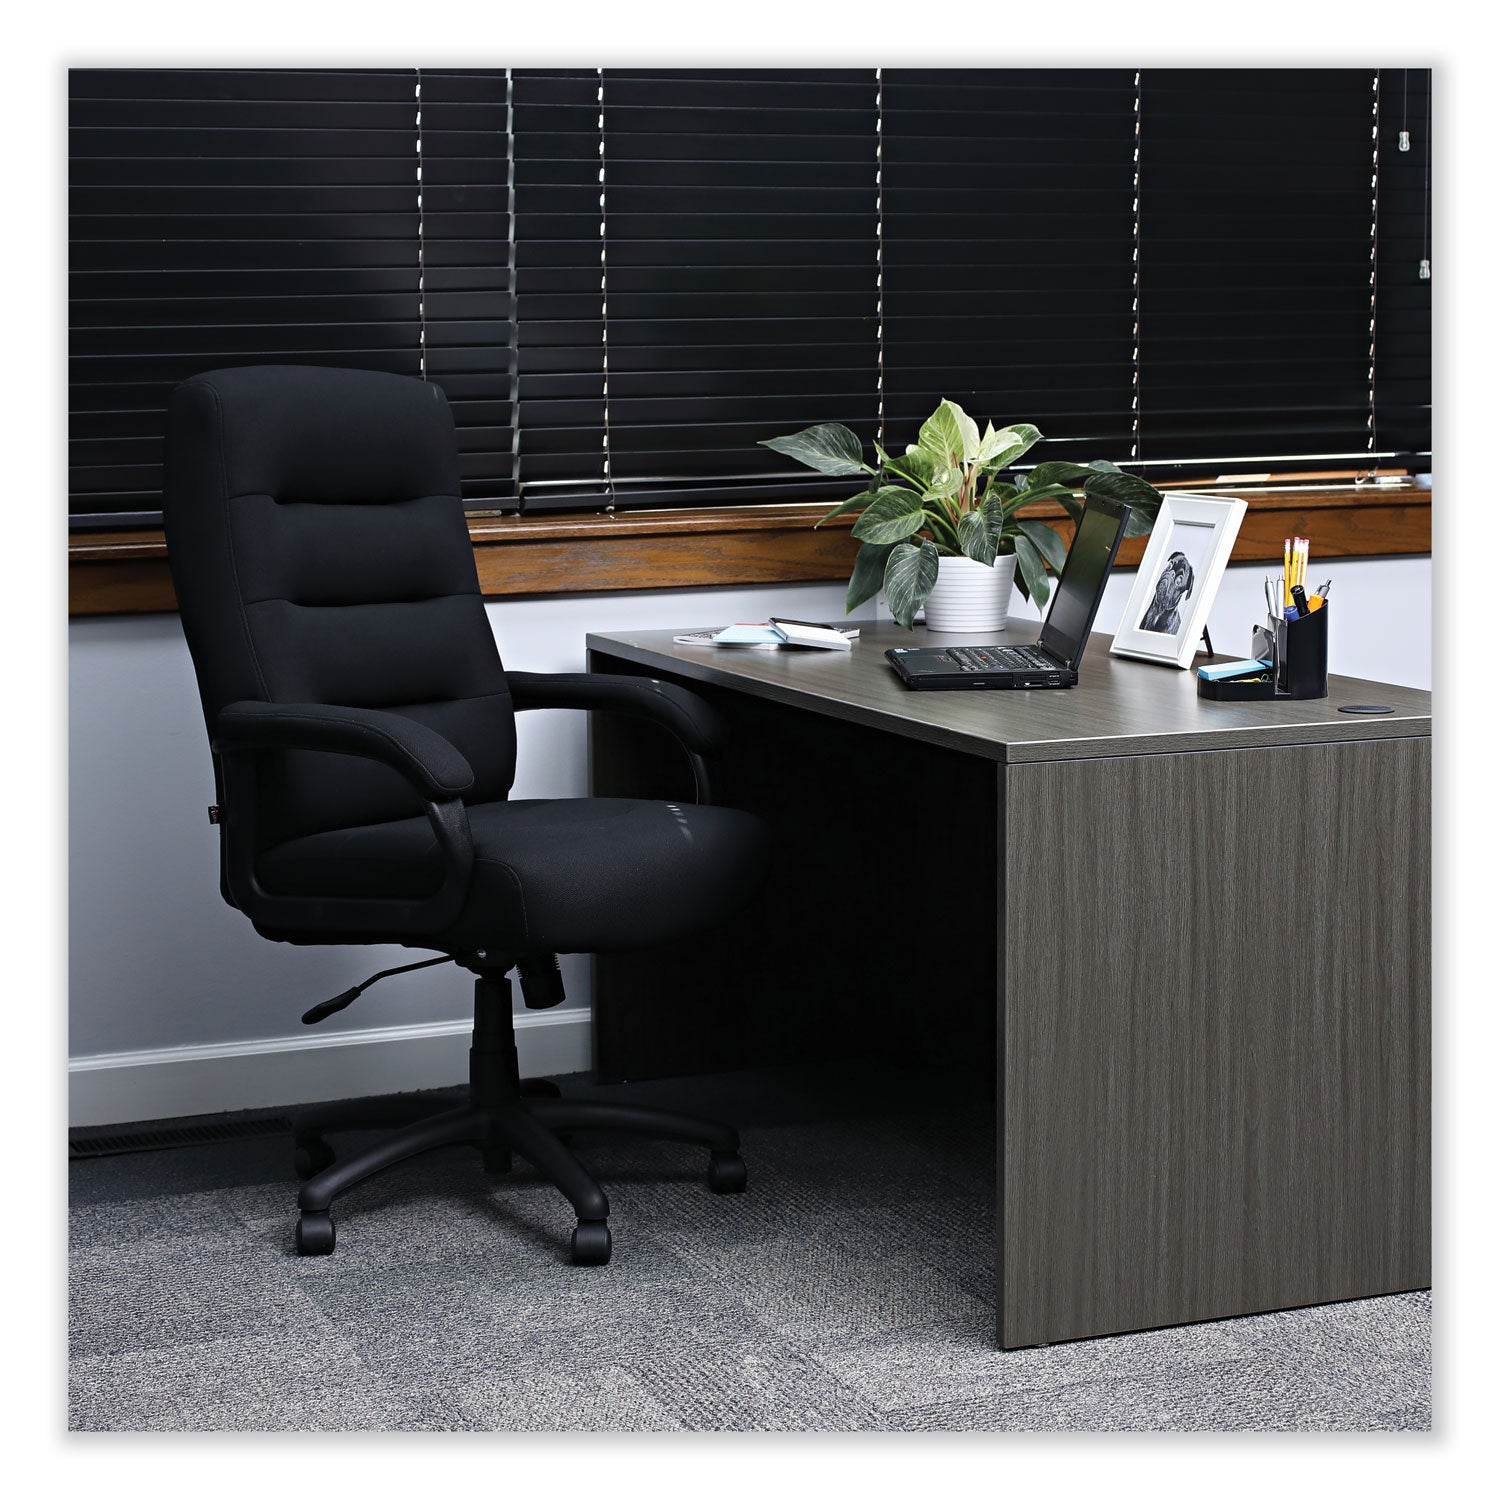 alera-kesson-series-high-back-office-chair-supports-up-to-300-lb-1921-to-227-seat-height-black_aleks4110 - 5